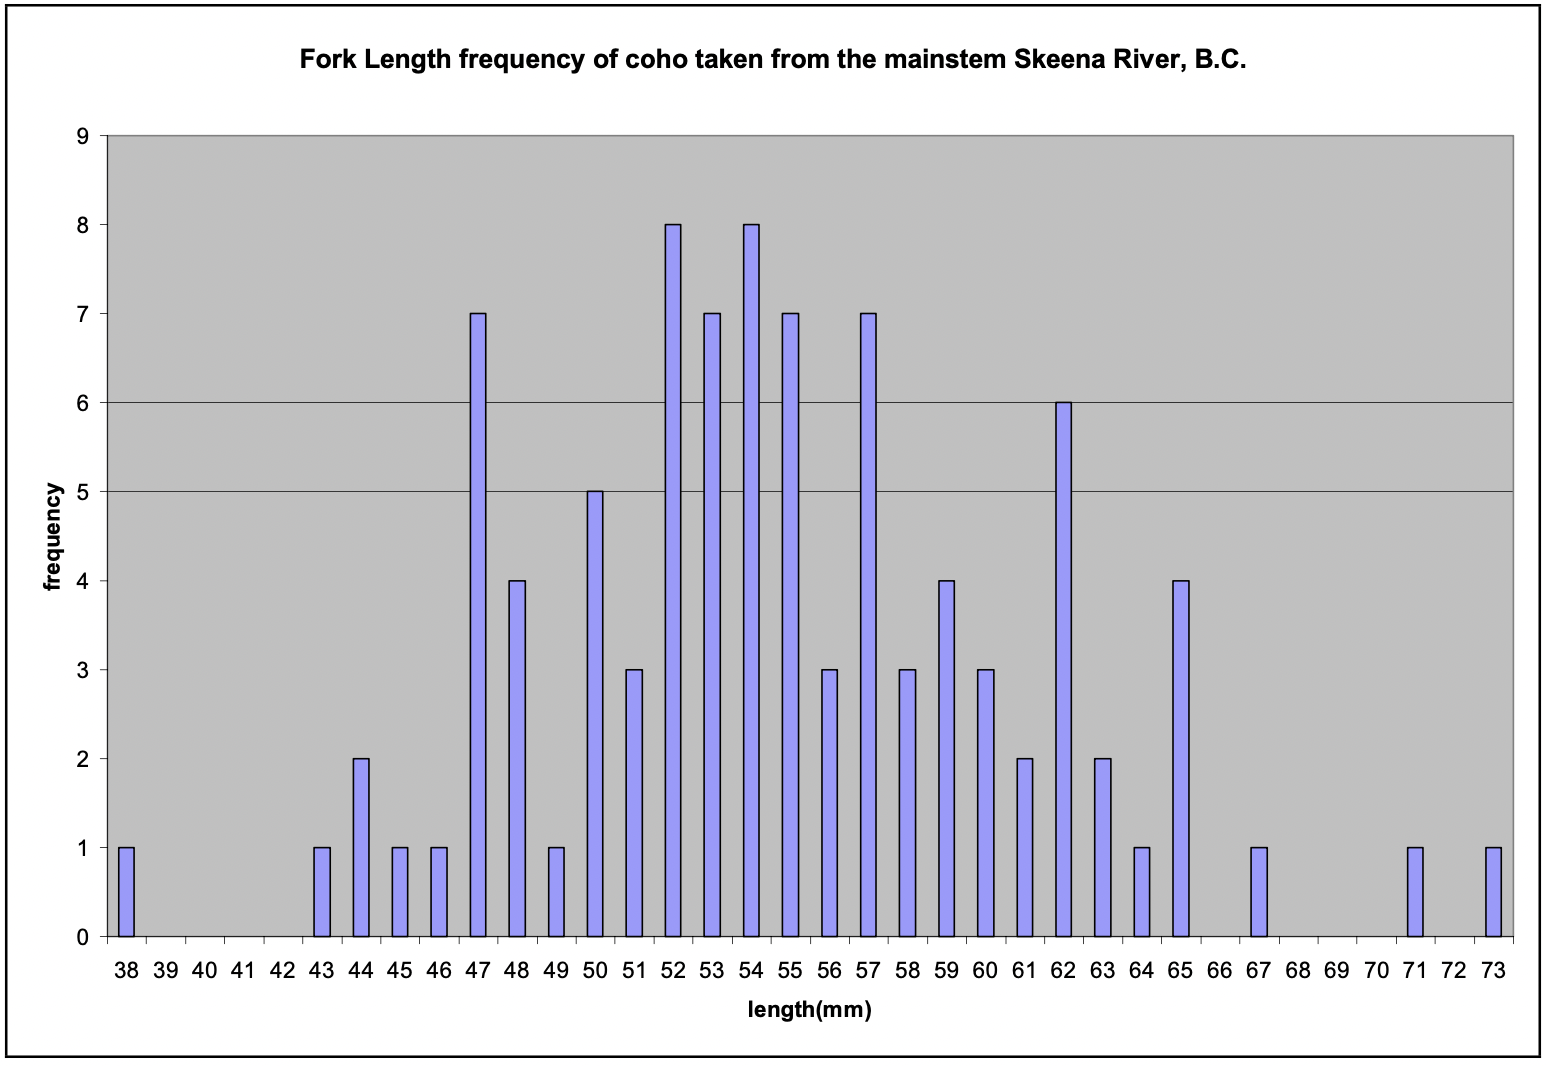 Figure 11. Fork length frequencies of coho salmon taken from various locations in the mainstem of the Skeena River, B.C. sampled between August 2nd and August 13th 2004.